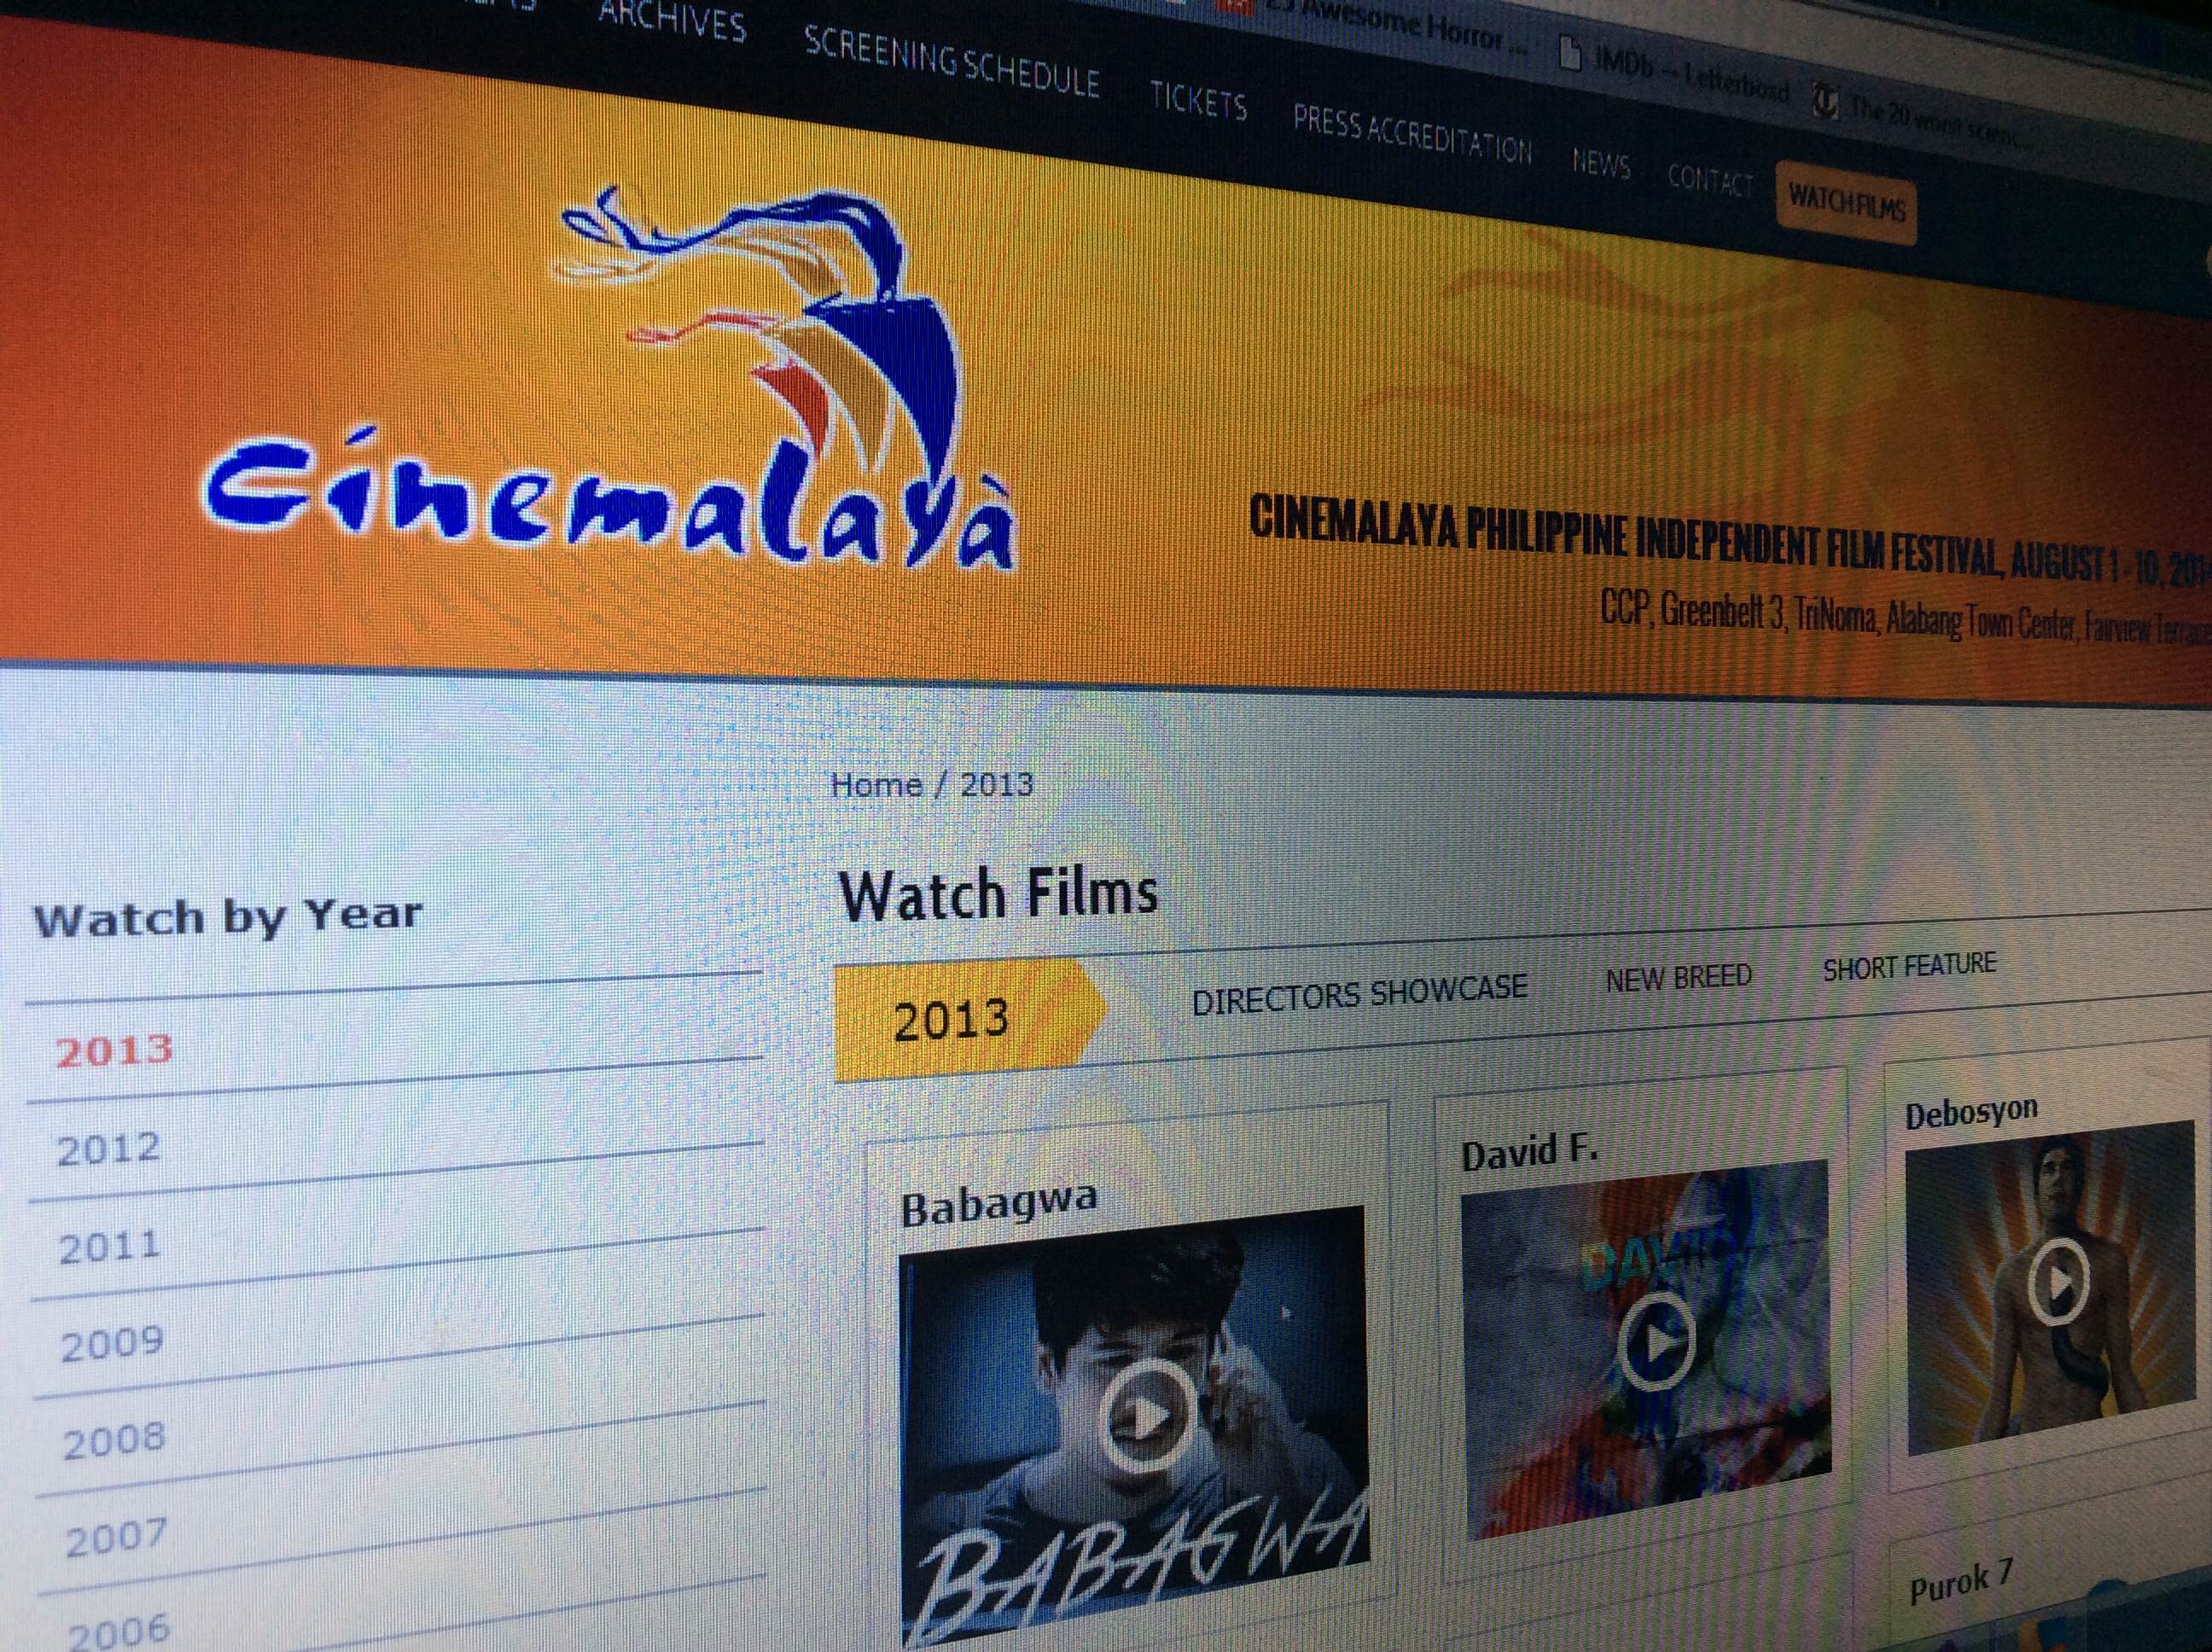 Previous Cinemalaya Entries ‘Mistakenly’ Uploaded to YouTube